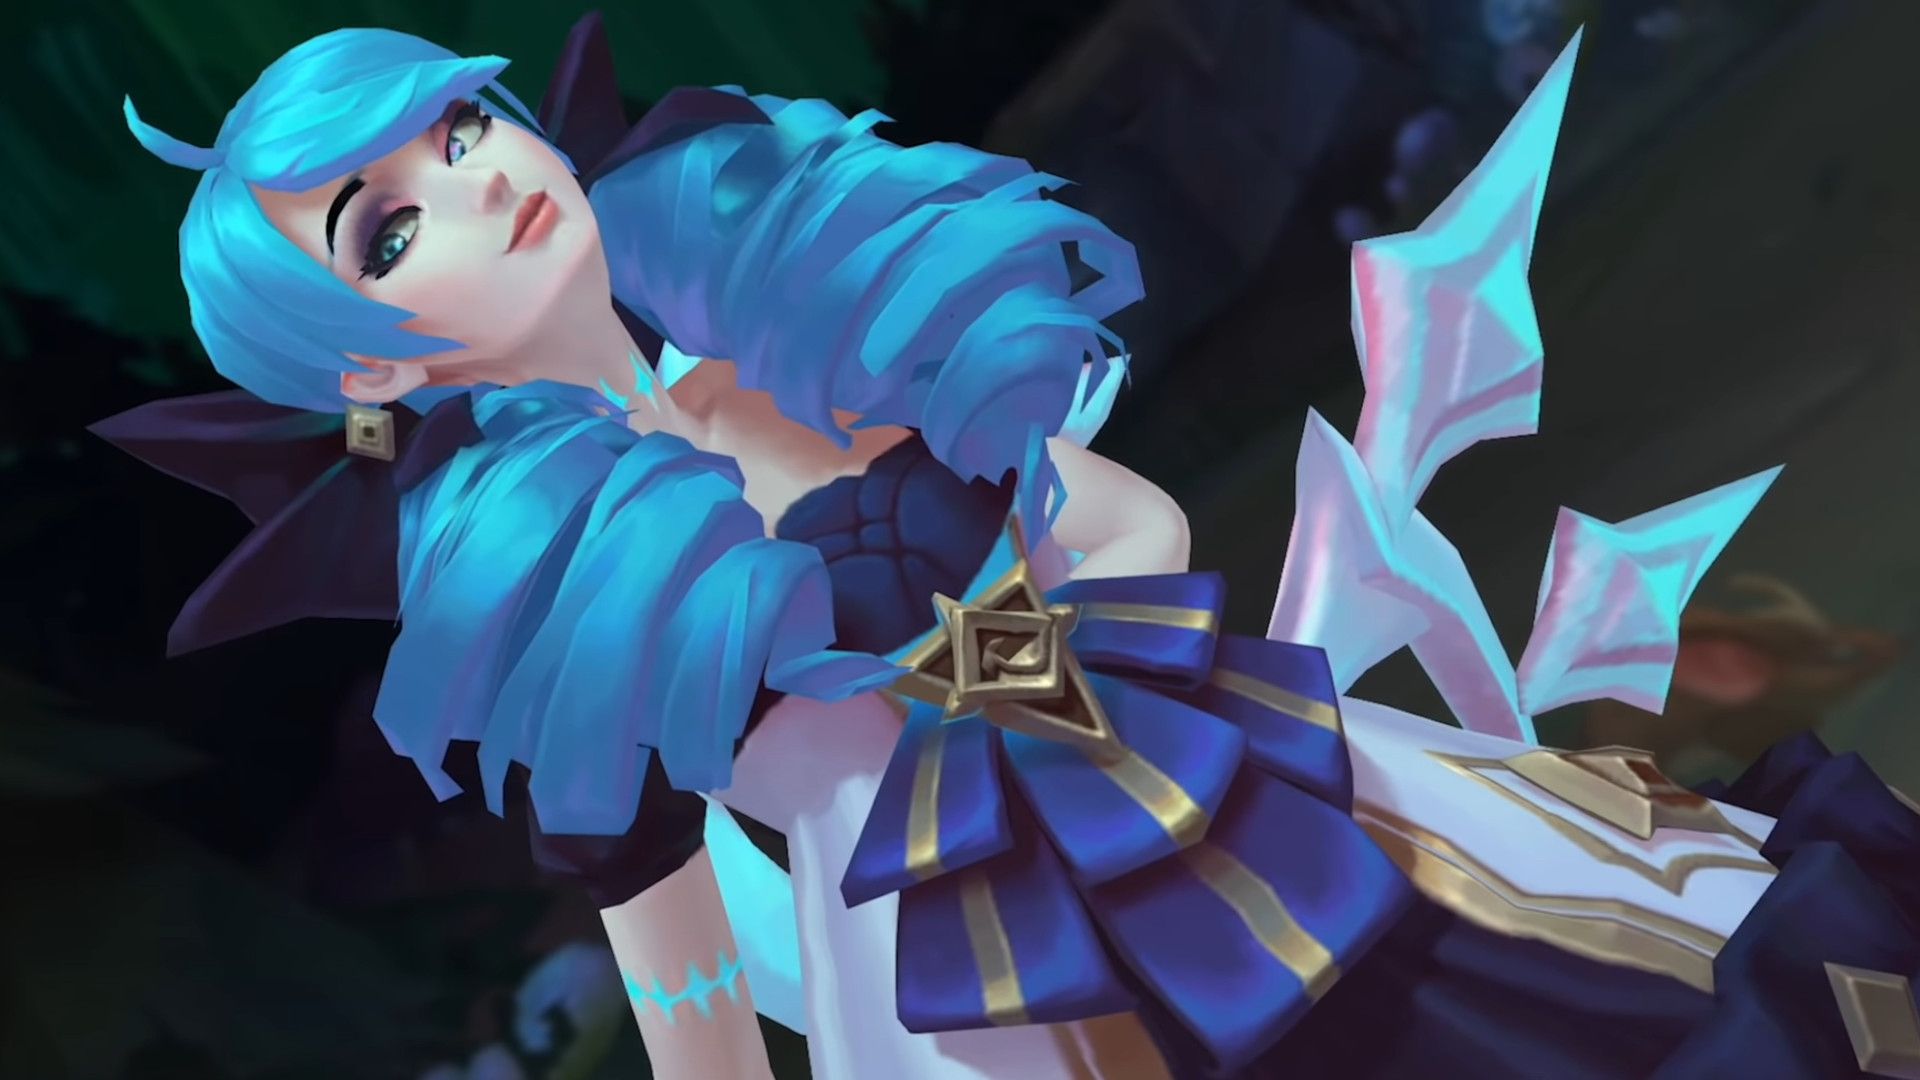 League of Legends' new champion is Gwen, and she's a creepy living doll